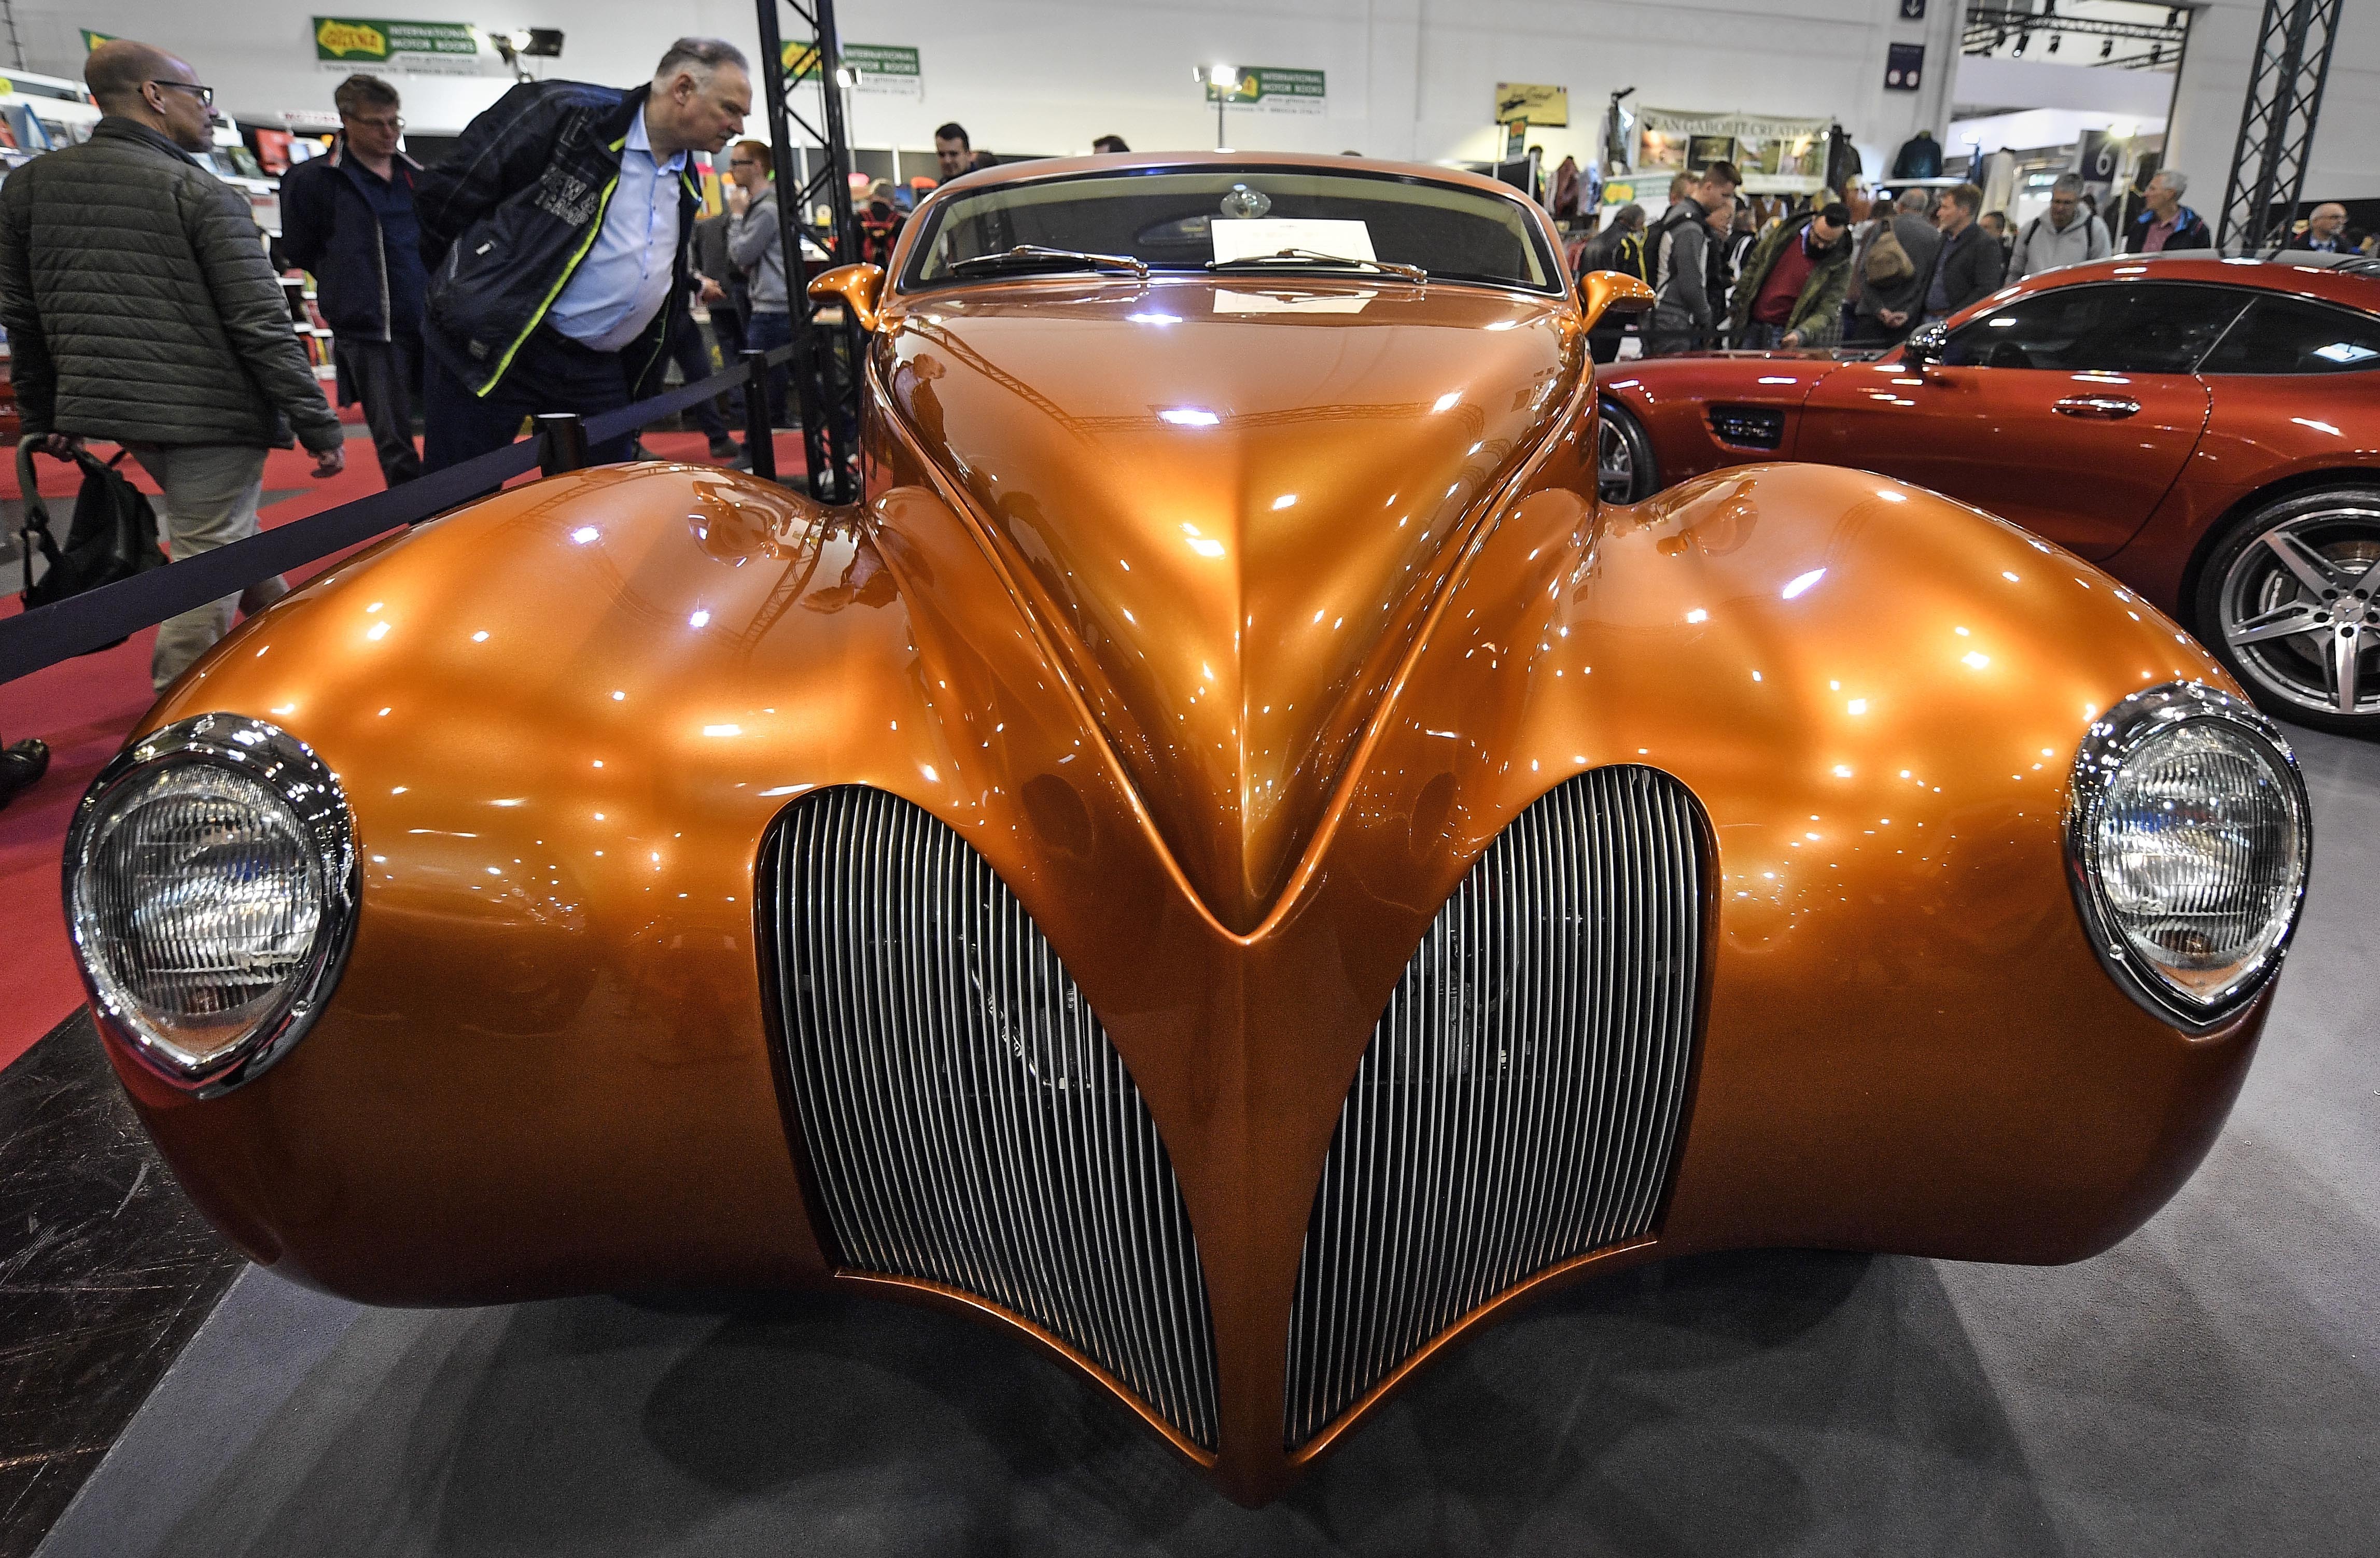 Visitors watch a Lincoln Zephyr 'El Zorro' vintage car from 1939 at the World Show for Vintage, Classic and Prestige Automobiles Techno-Classica in Essen, Germany, Friday, April 12, 2019. (AP Photo/Martin Meissner)